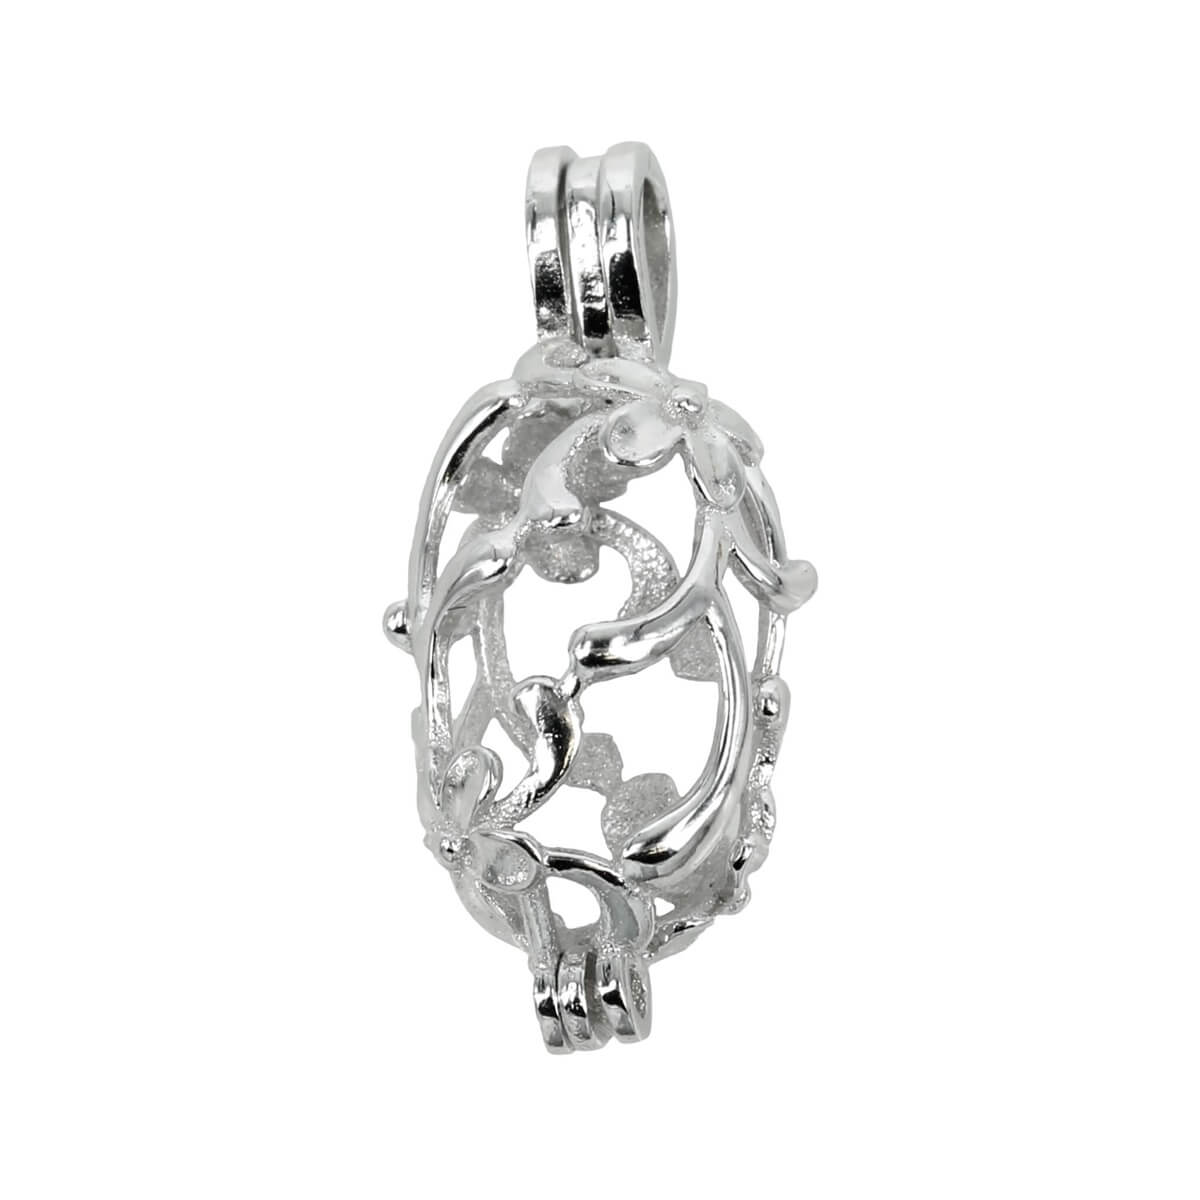 Floral Motif Cage Pendant with Incorporated Bail in Sterling Silver 8x15mm 